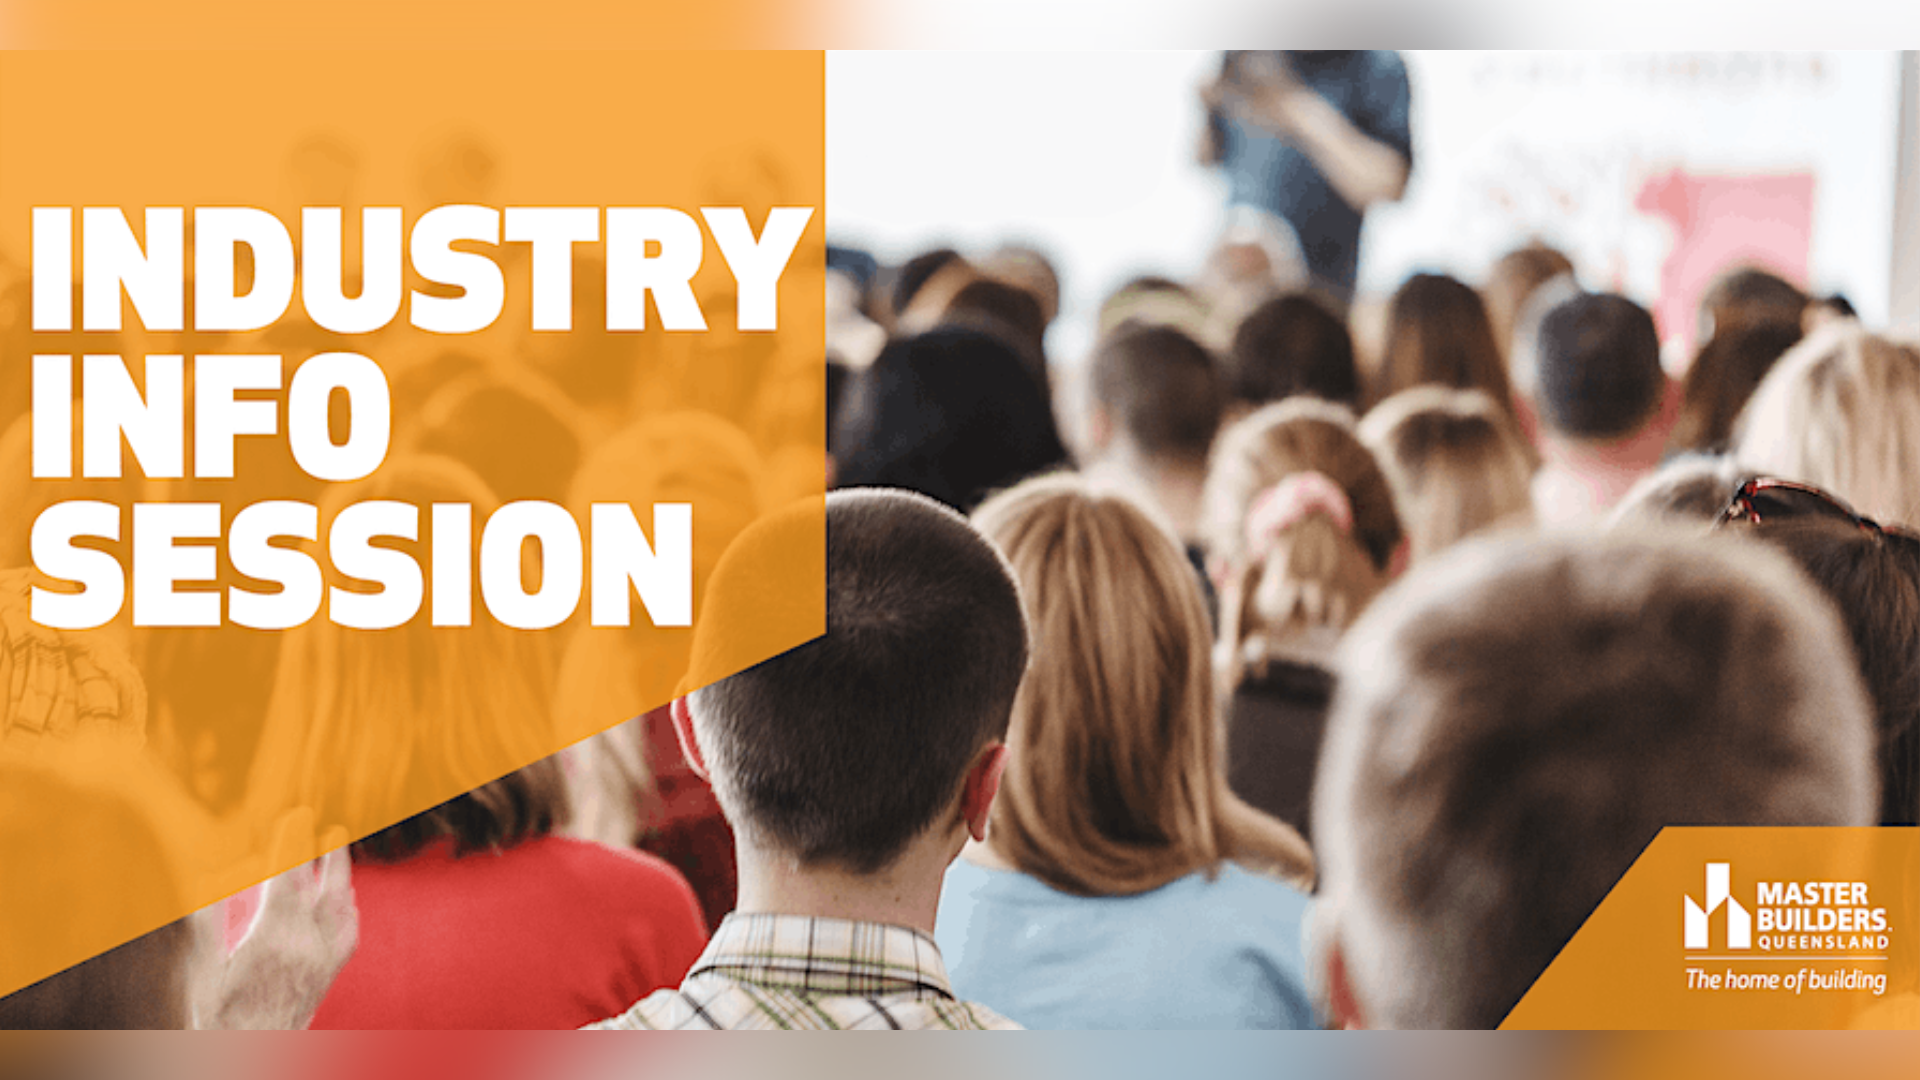 Event header for Townsville Industry Info Session.